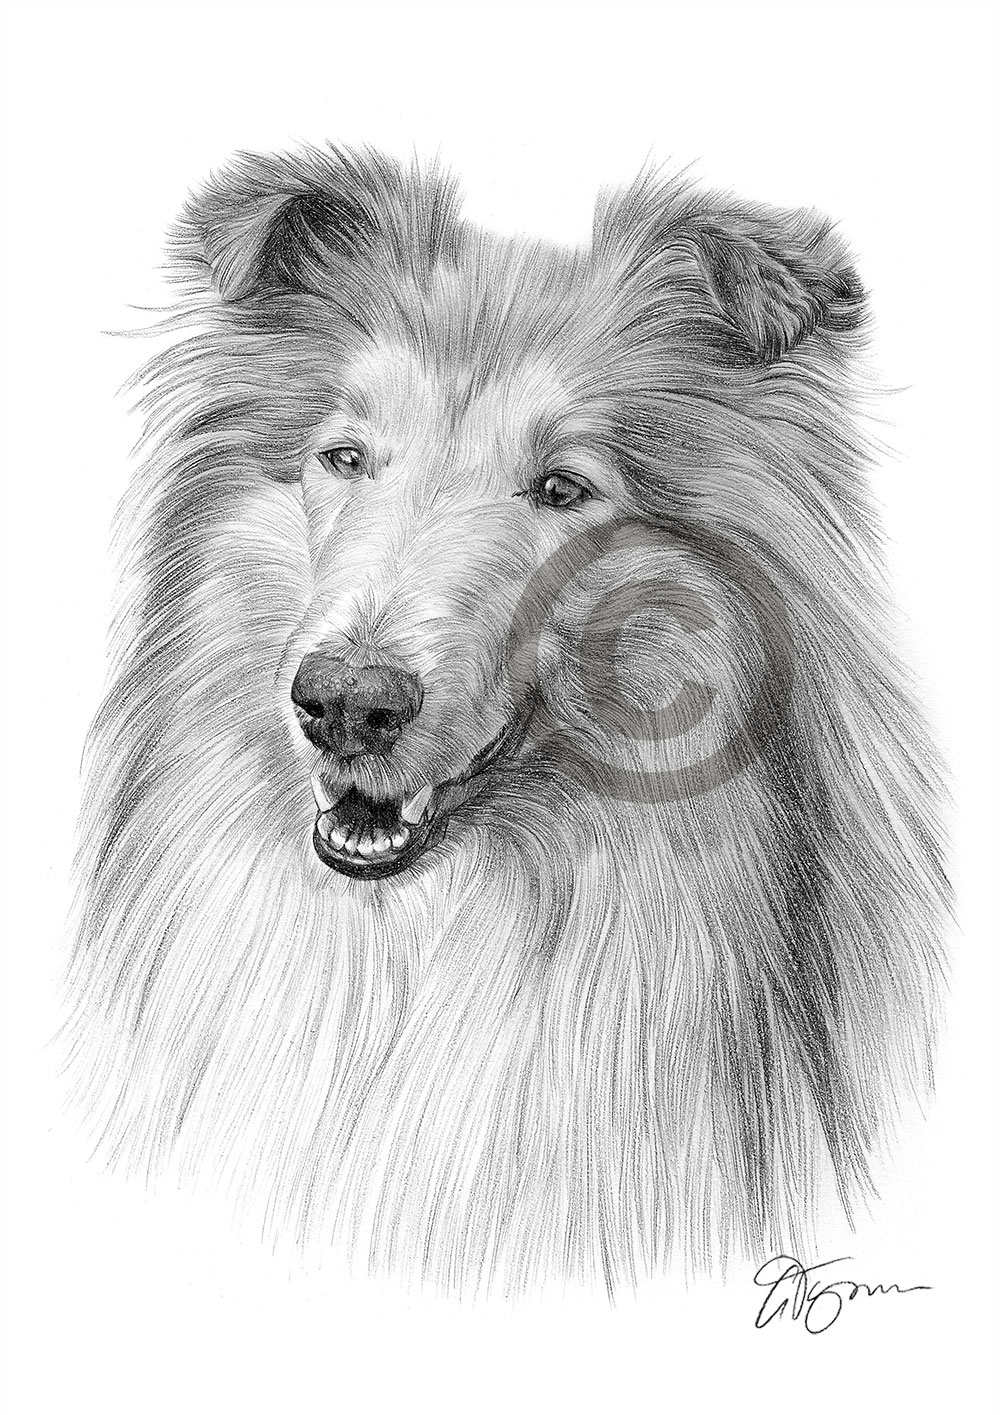 Pencil drawing of a Rough Collie by artist Gary Tymon